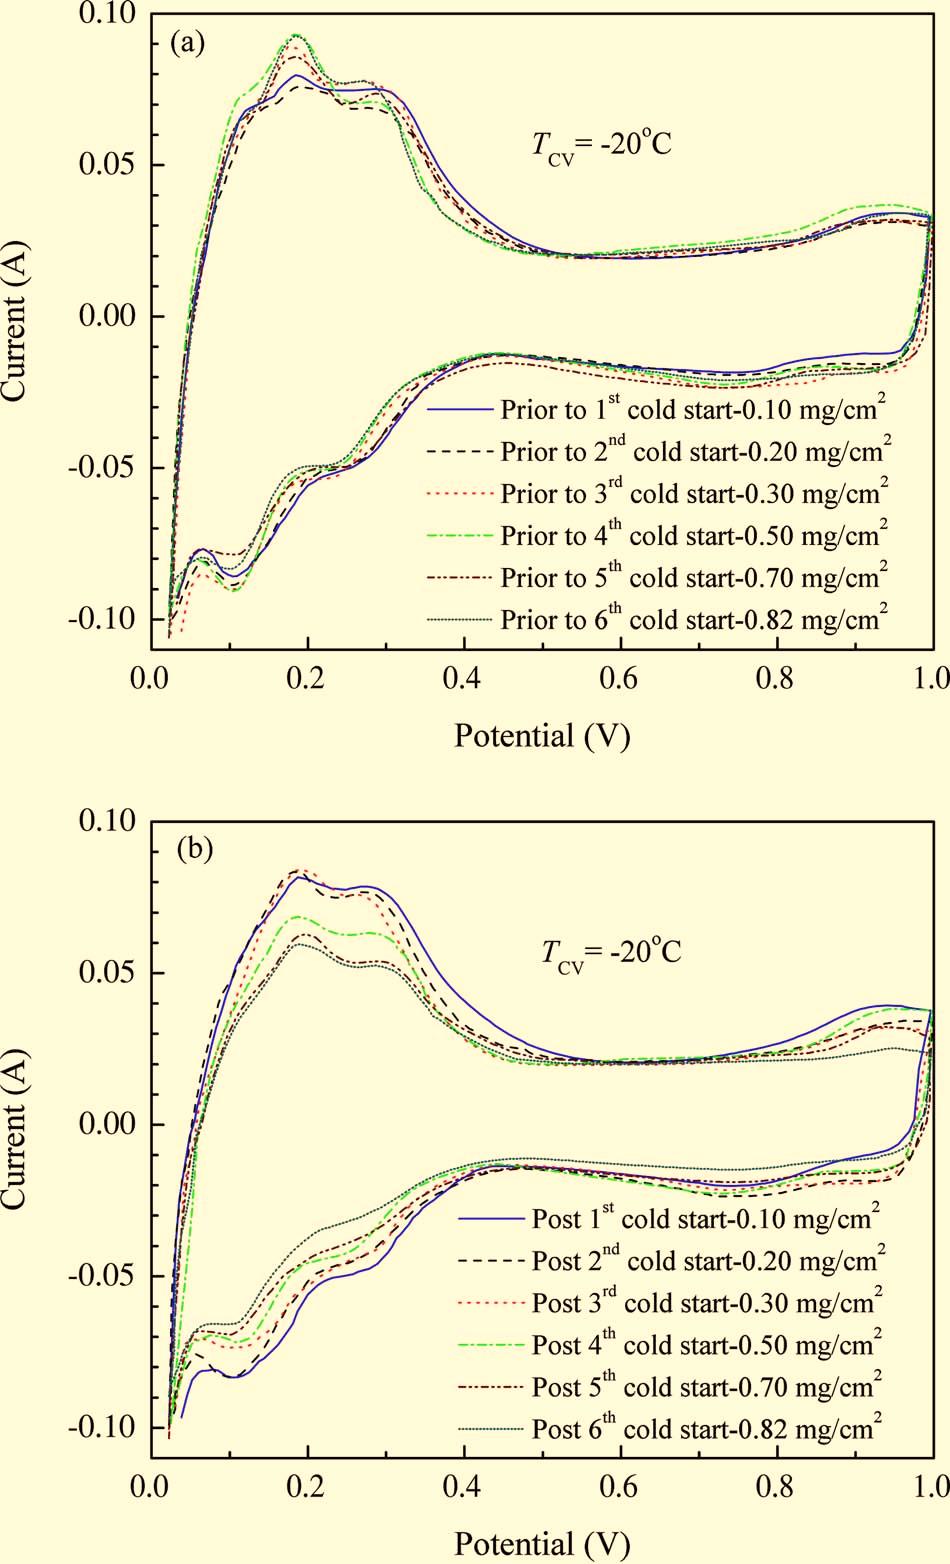 B1404 Journal of The Electrochemical Society, 154 12 B1399-B1406 2007 Figure 9. Color online Comparison of cell polarization curves in the cold start cycle from 20 C.